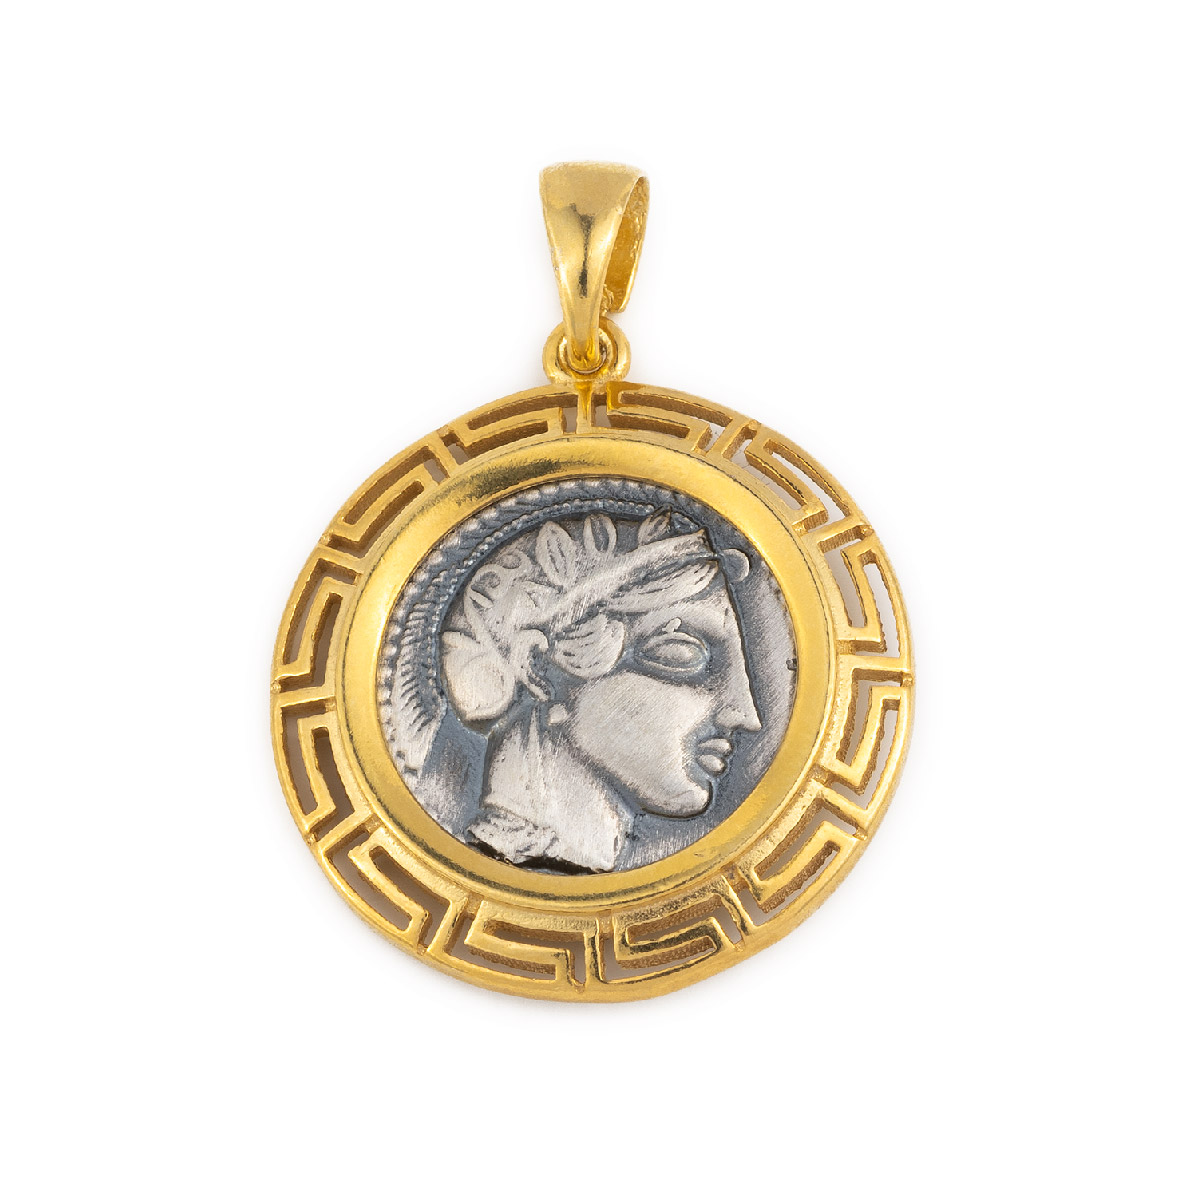 - Meander Design Goddess Athena Silver Coin Pendant High Quality Gold Plated 